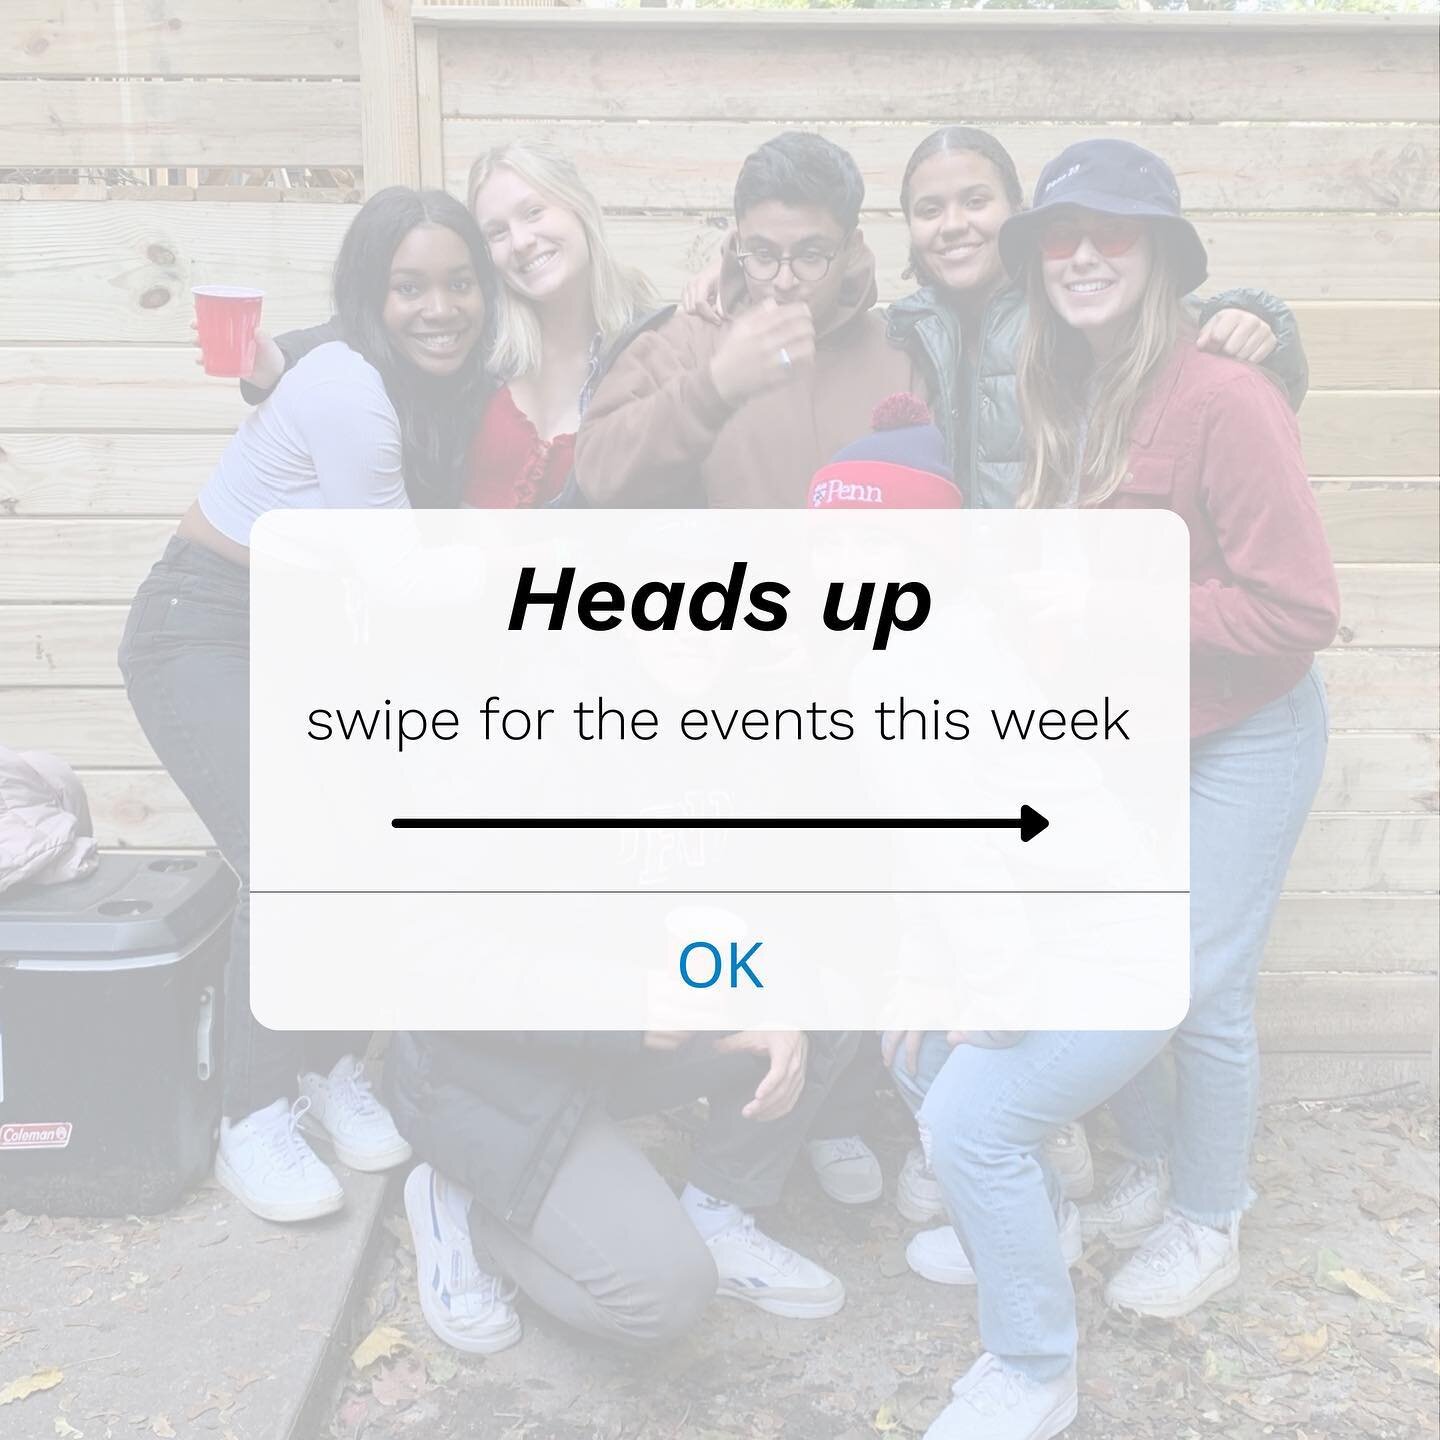 Bigggg week ahead! Swipe to see all of our events this week 🥳🥳🥳